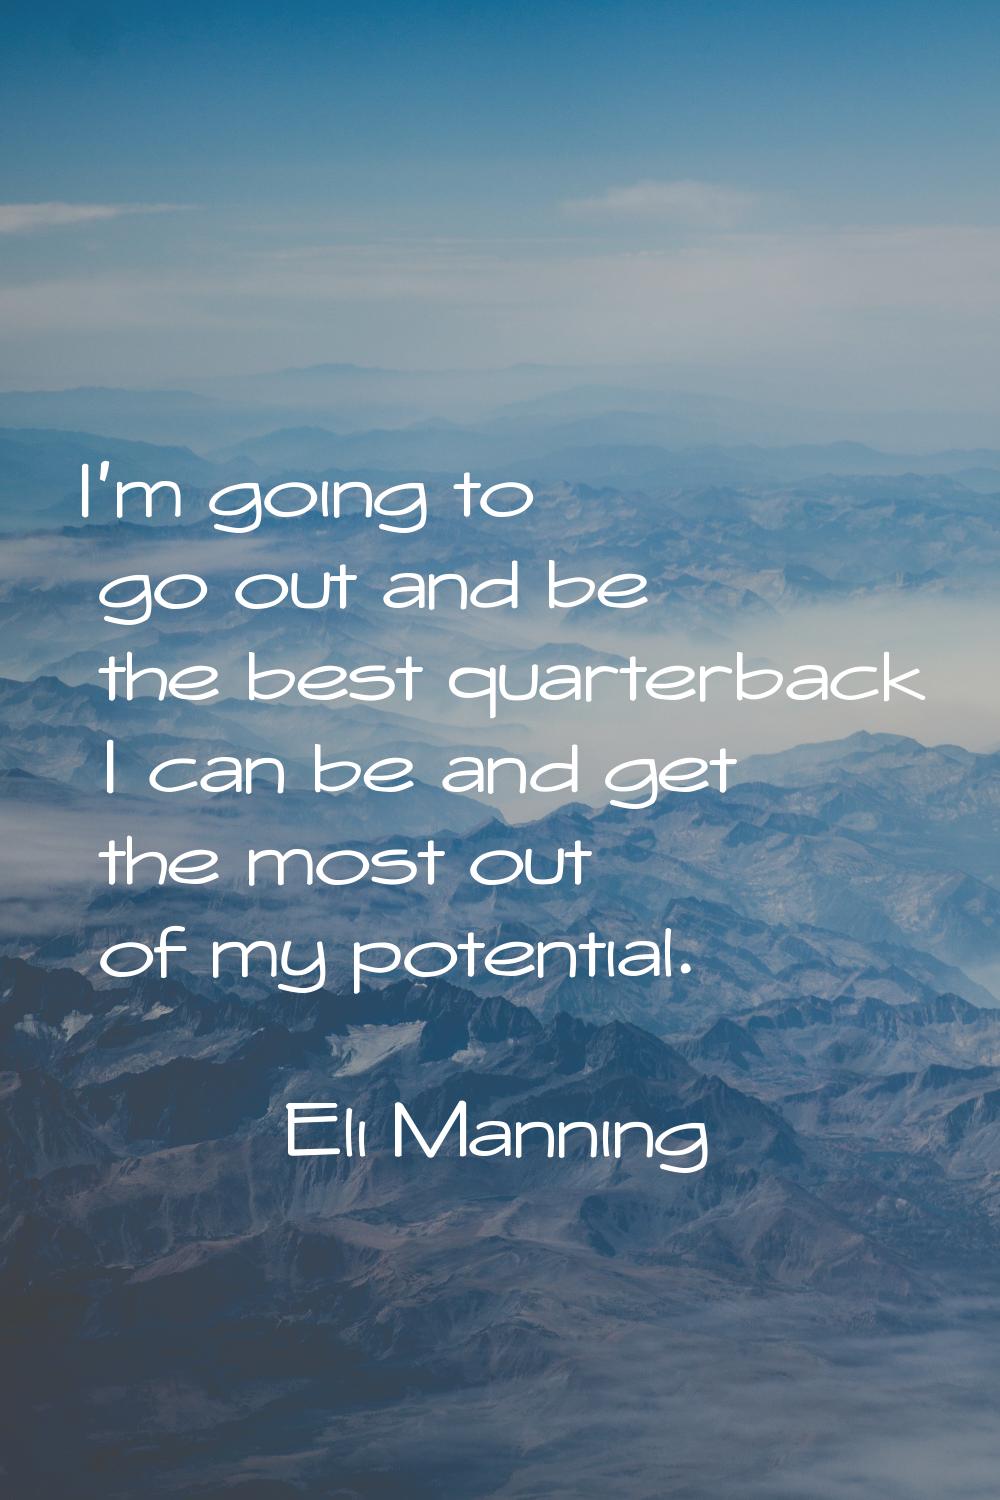 I'm going to go out and be the best quarterback I can be and get the most out of my potential.